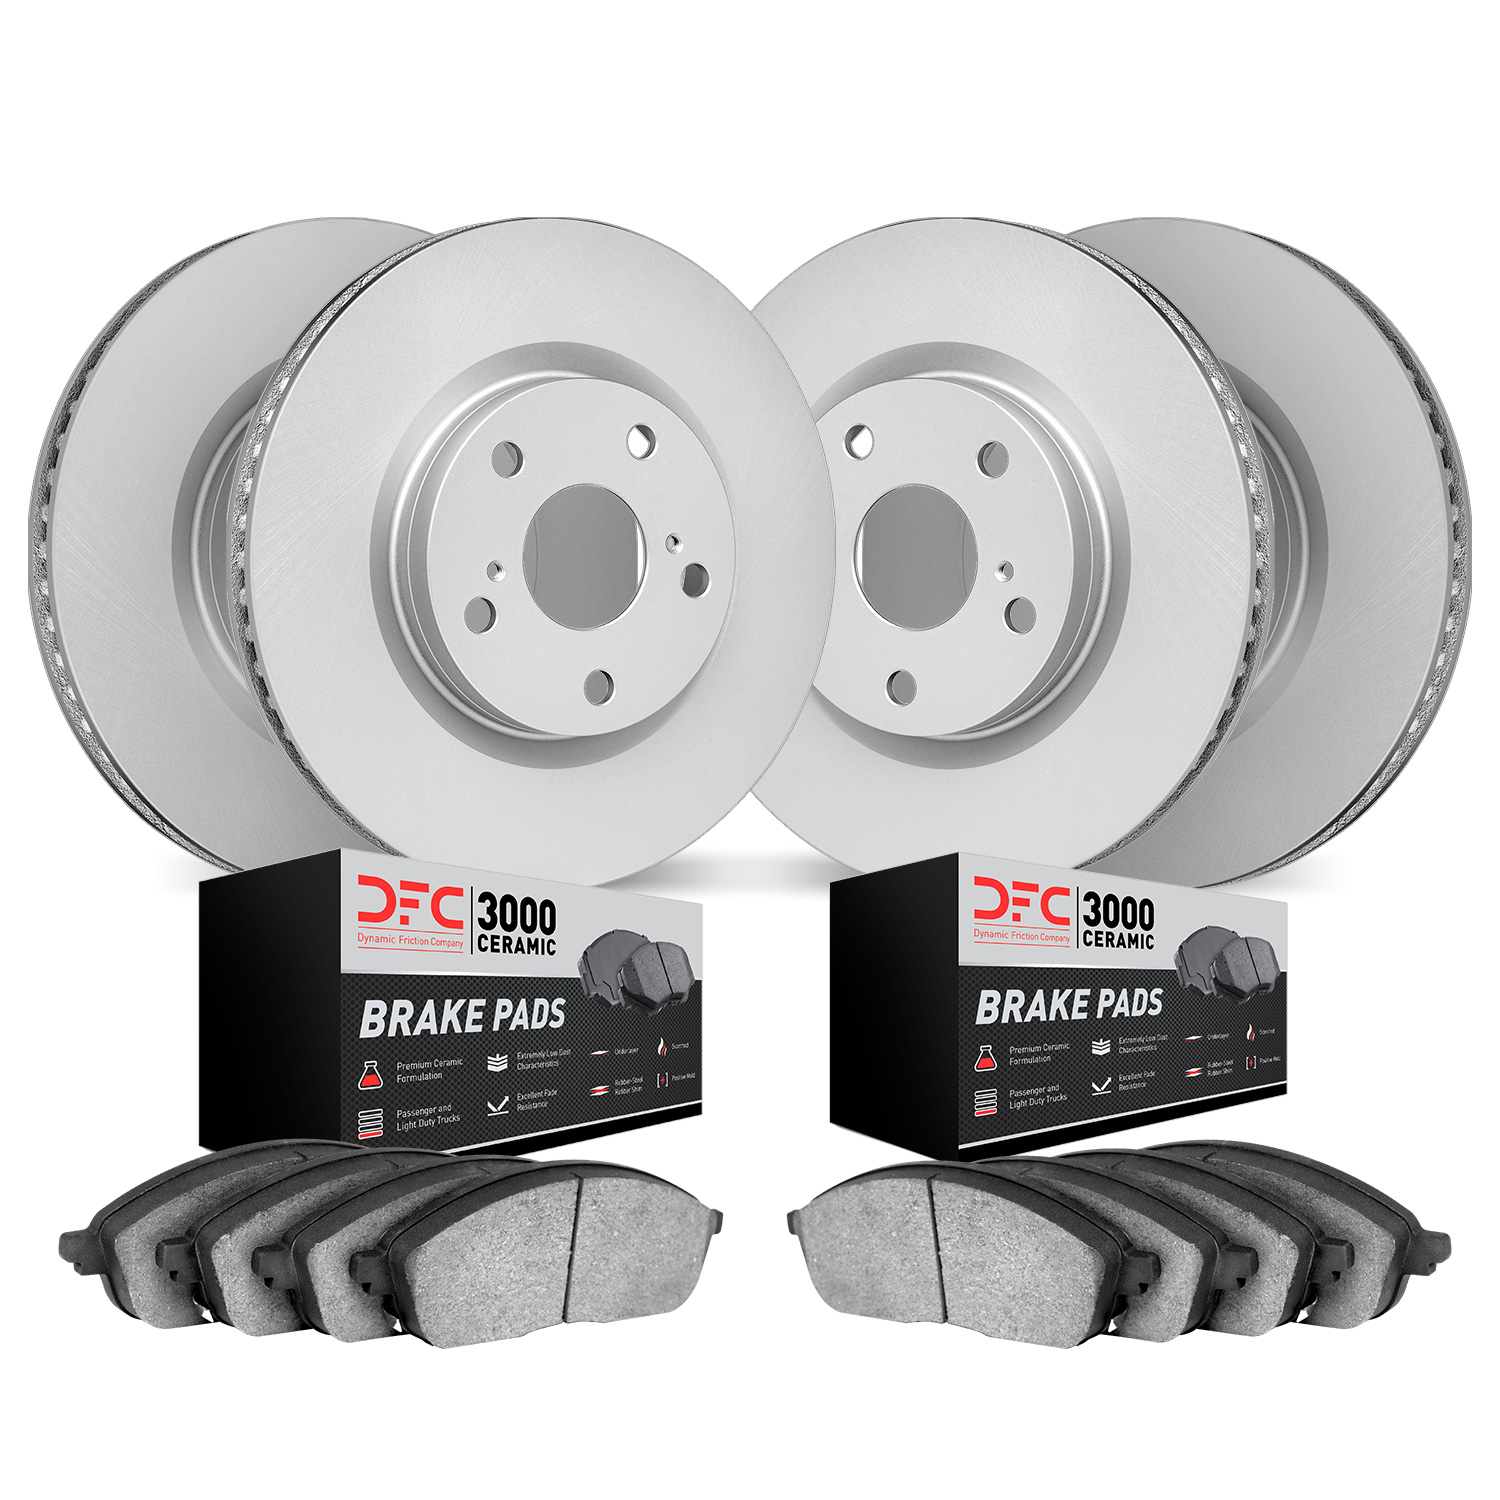 4304-58003 Geospec Brake Rotors with 3000-Series Ceramic Brake Pads Kit, 2005-2012 Acura/Honda, Position: Front and Rear